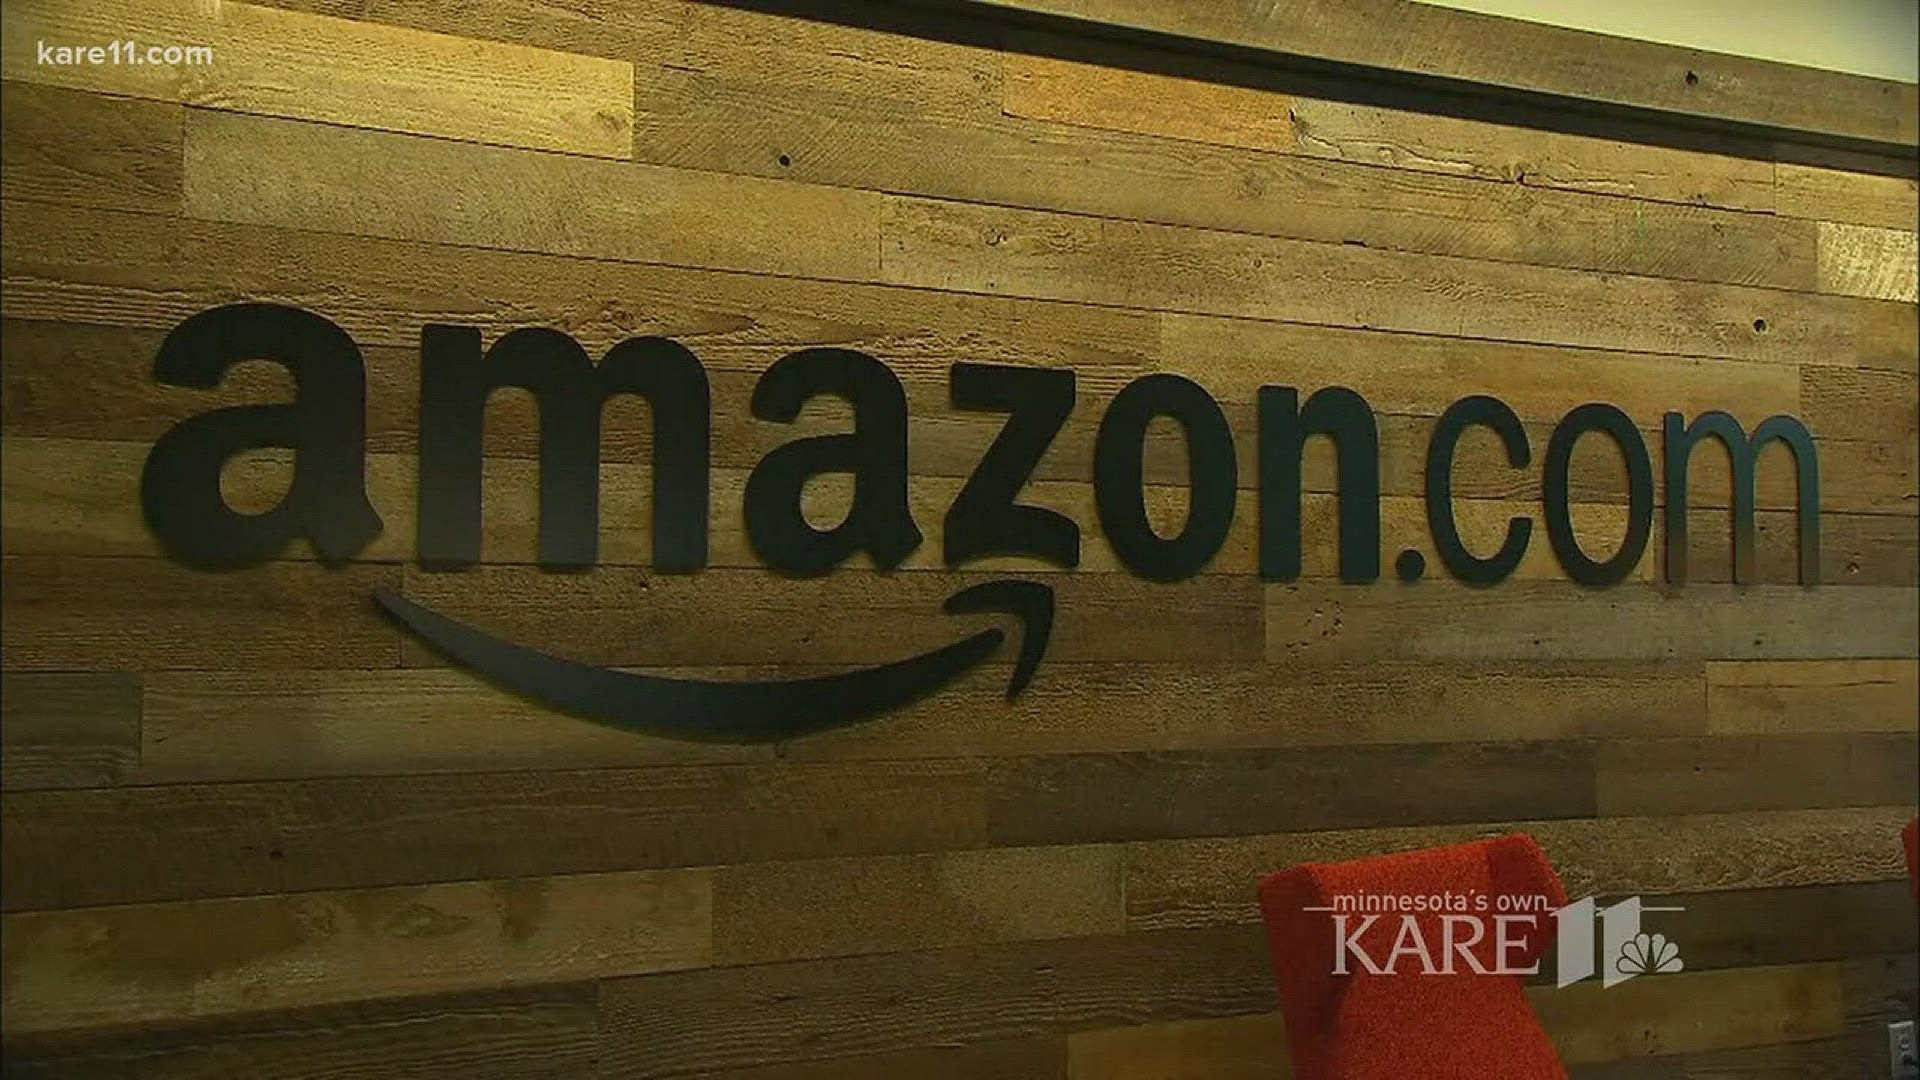 Amazon narrows its search for 2nd headquarters, MN misses cut